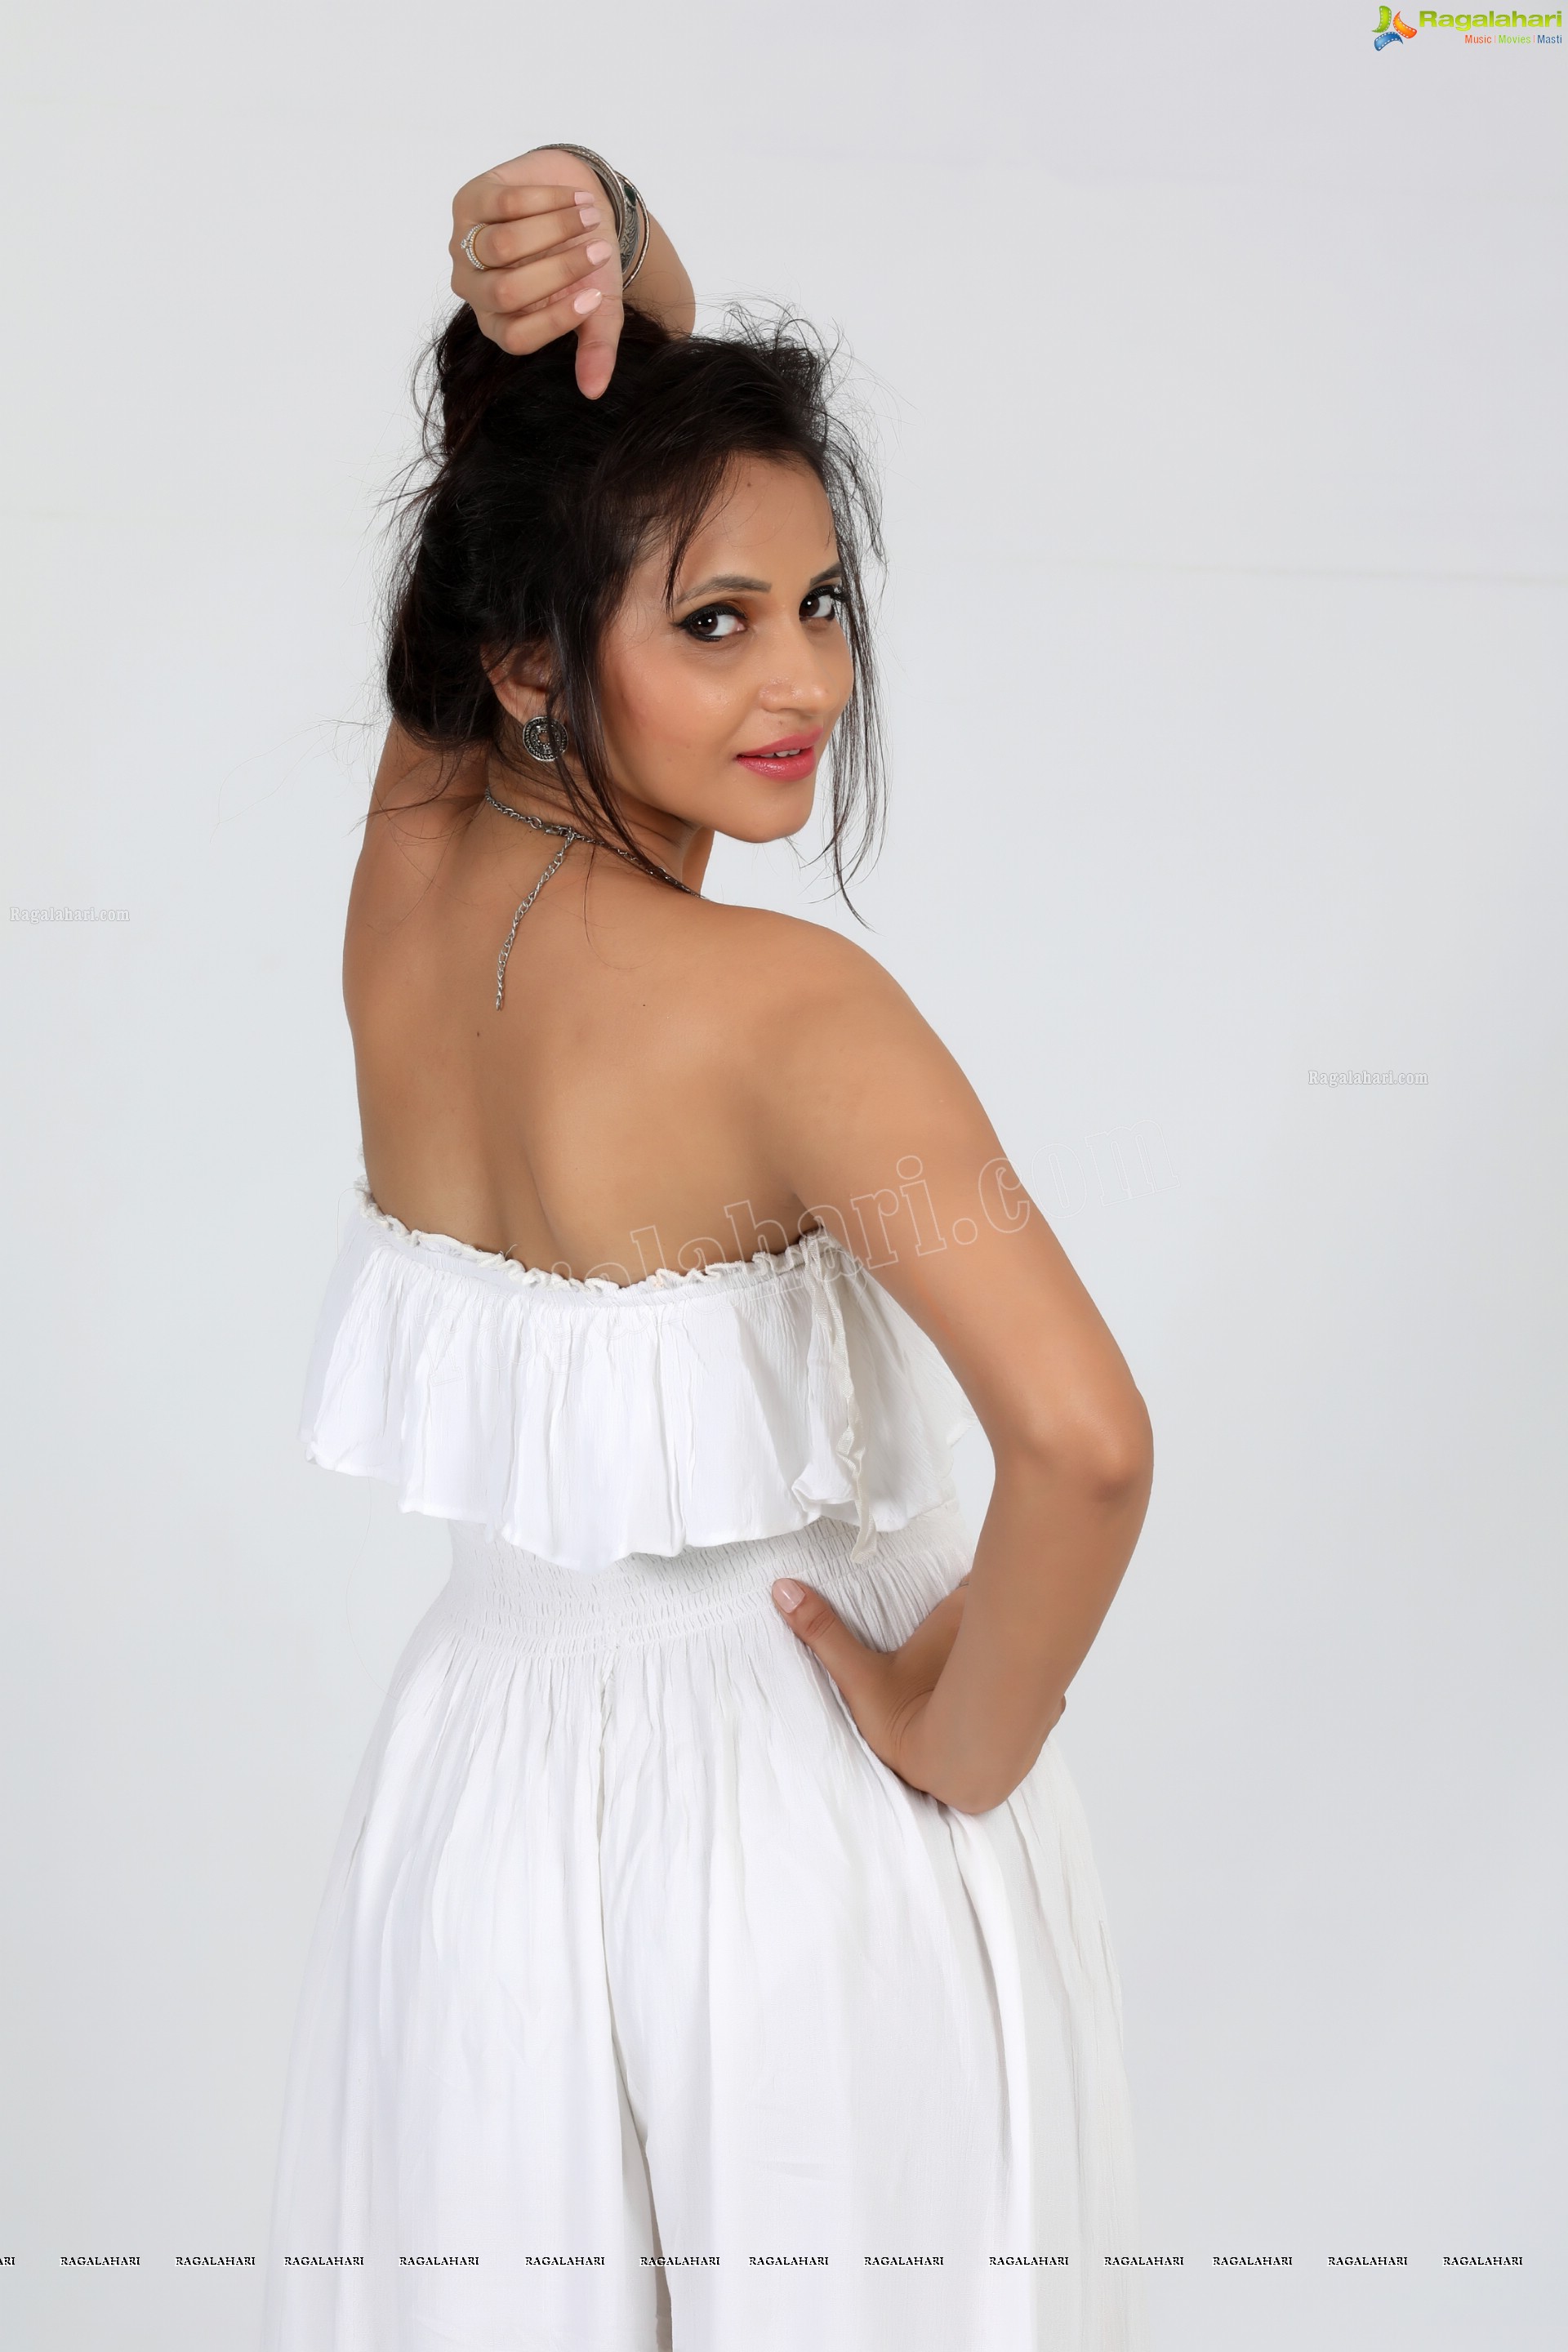 Khushboo Naaz (Exclusive Photo Shoot) (High Definition Photos)